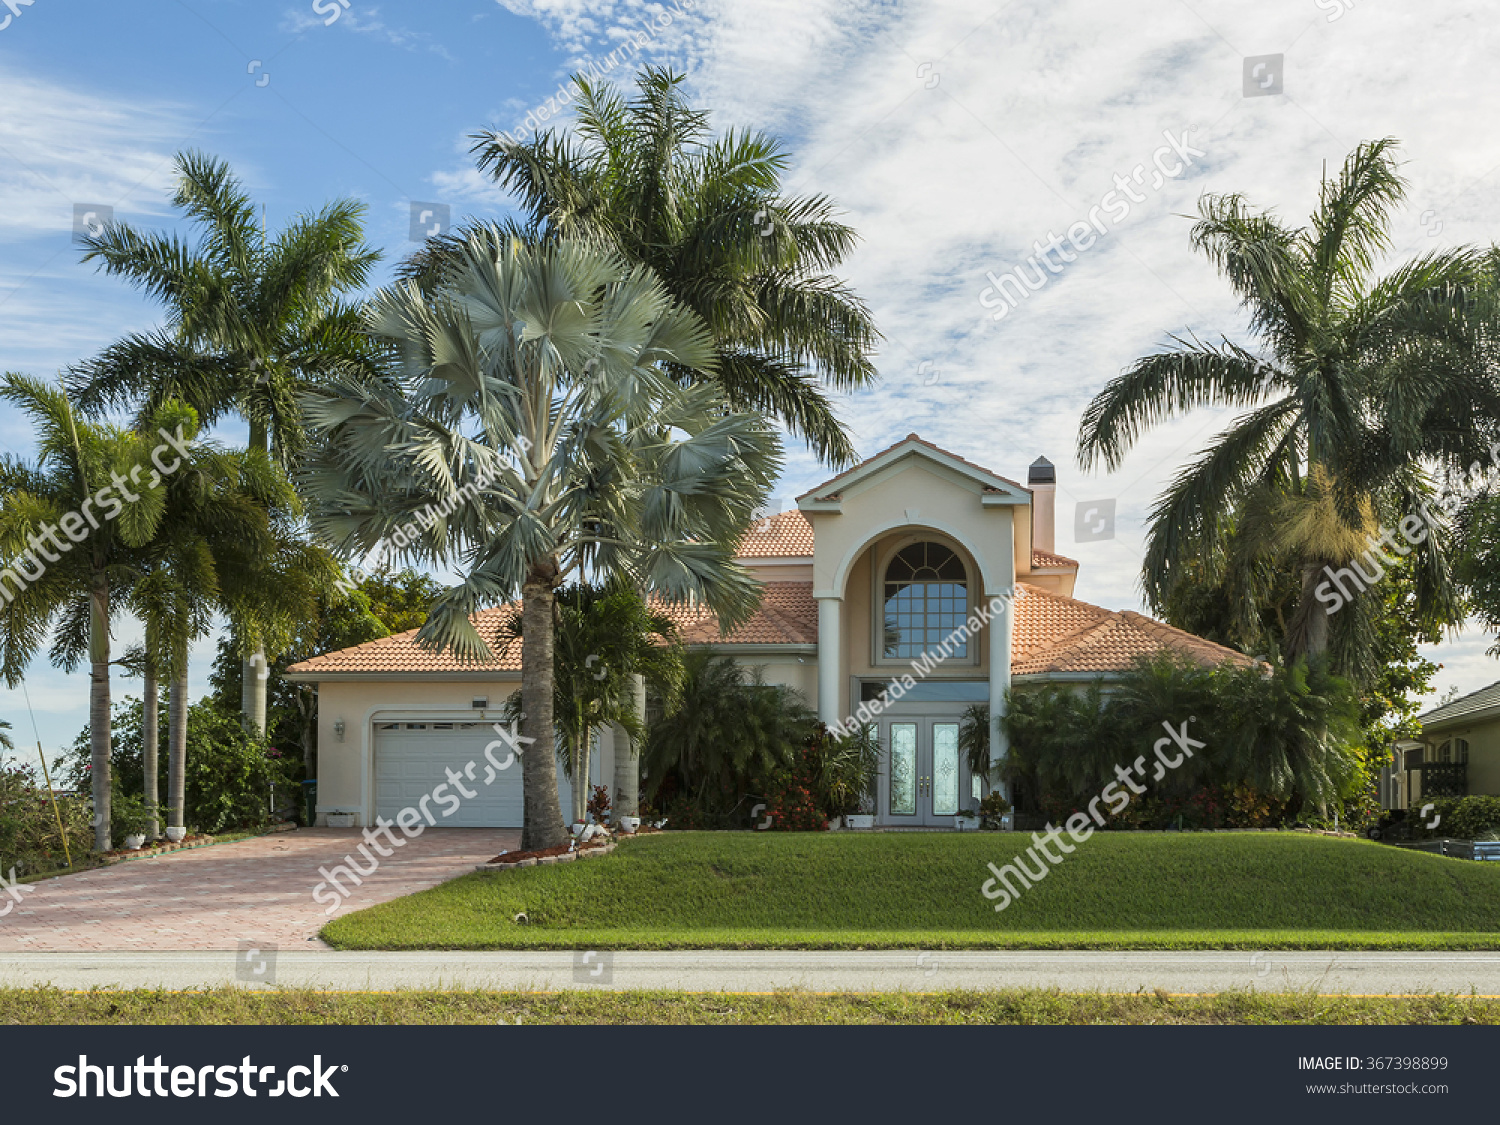 Typical Southwest Florida home in the countryside with palm trees, tropical plants and flowers, grass and pine trees. Inlaid pavement at the entrance. Florida #367398899